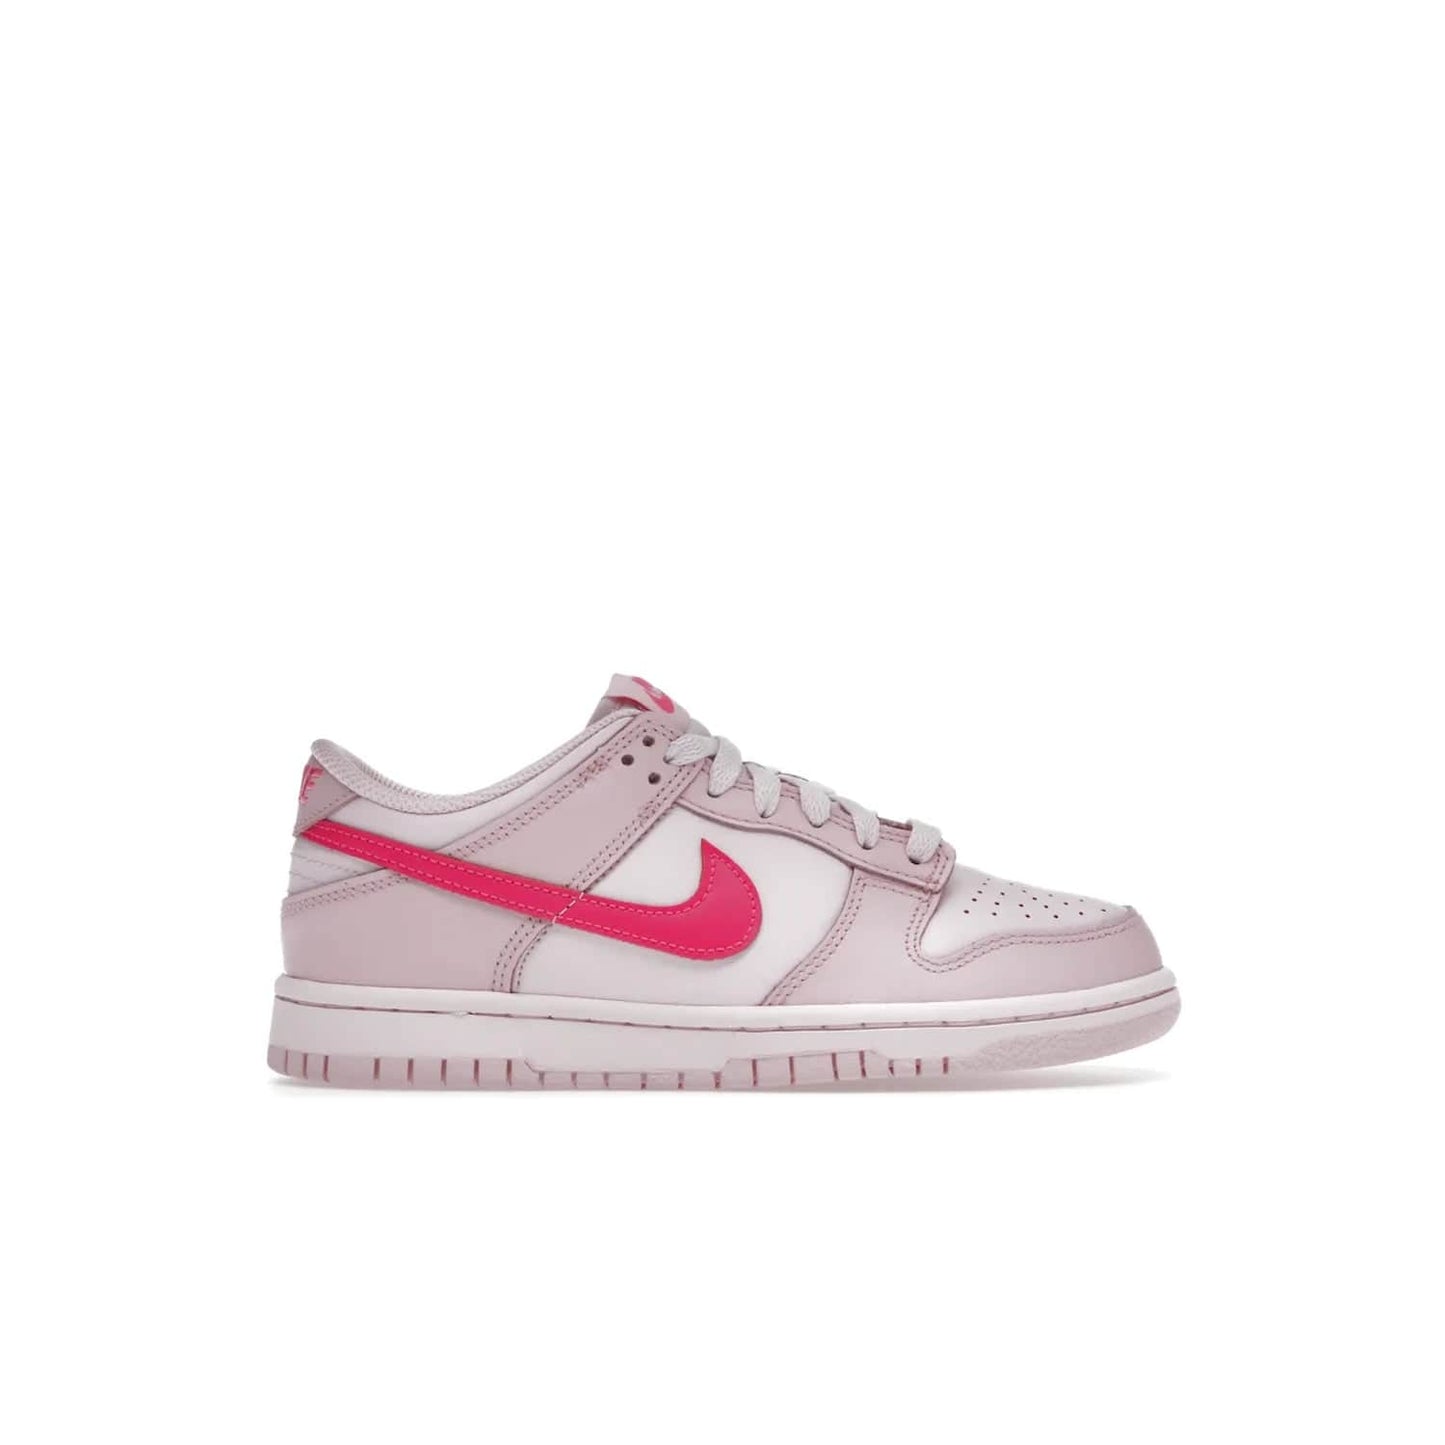 Nike Dunk Low Triple Pink (GS) - Image 1 - Only at www.BallersClubKickz.com - The Nike Dunk Low Triple Pink provides bold style in GS sizing. Featuring 3 distinct shades of pink and Nike branding, the shoe stands out.